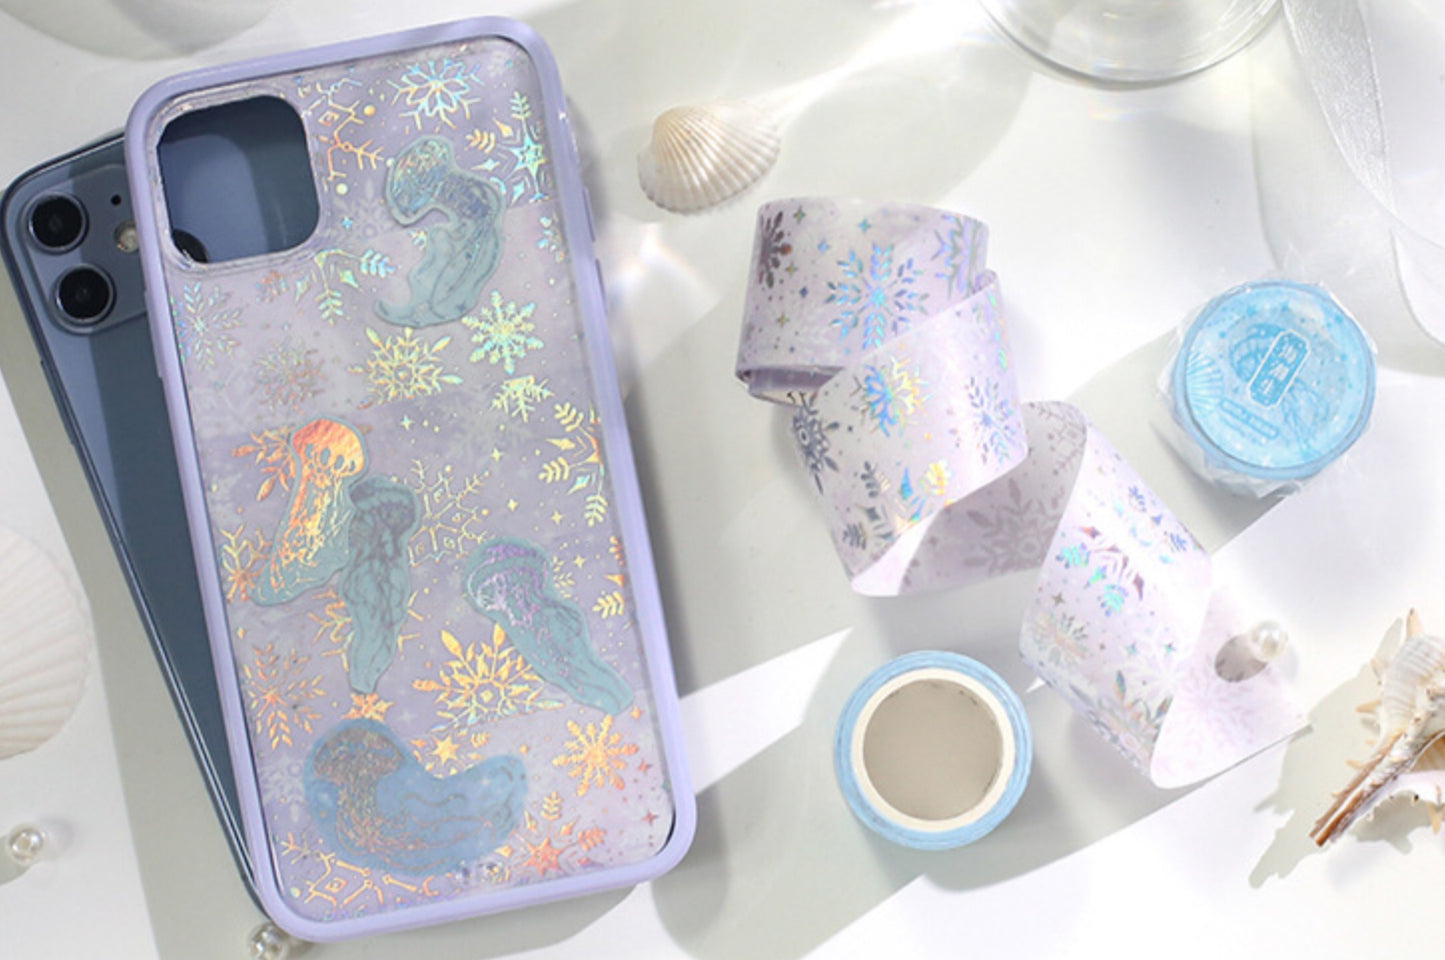  Holographic Washi Tapes mobile cover